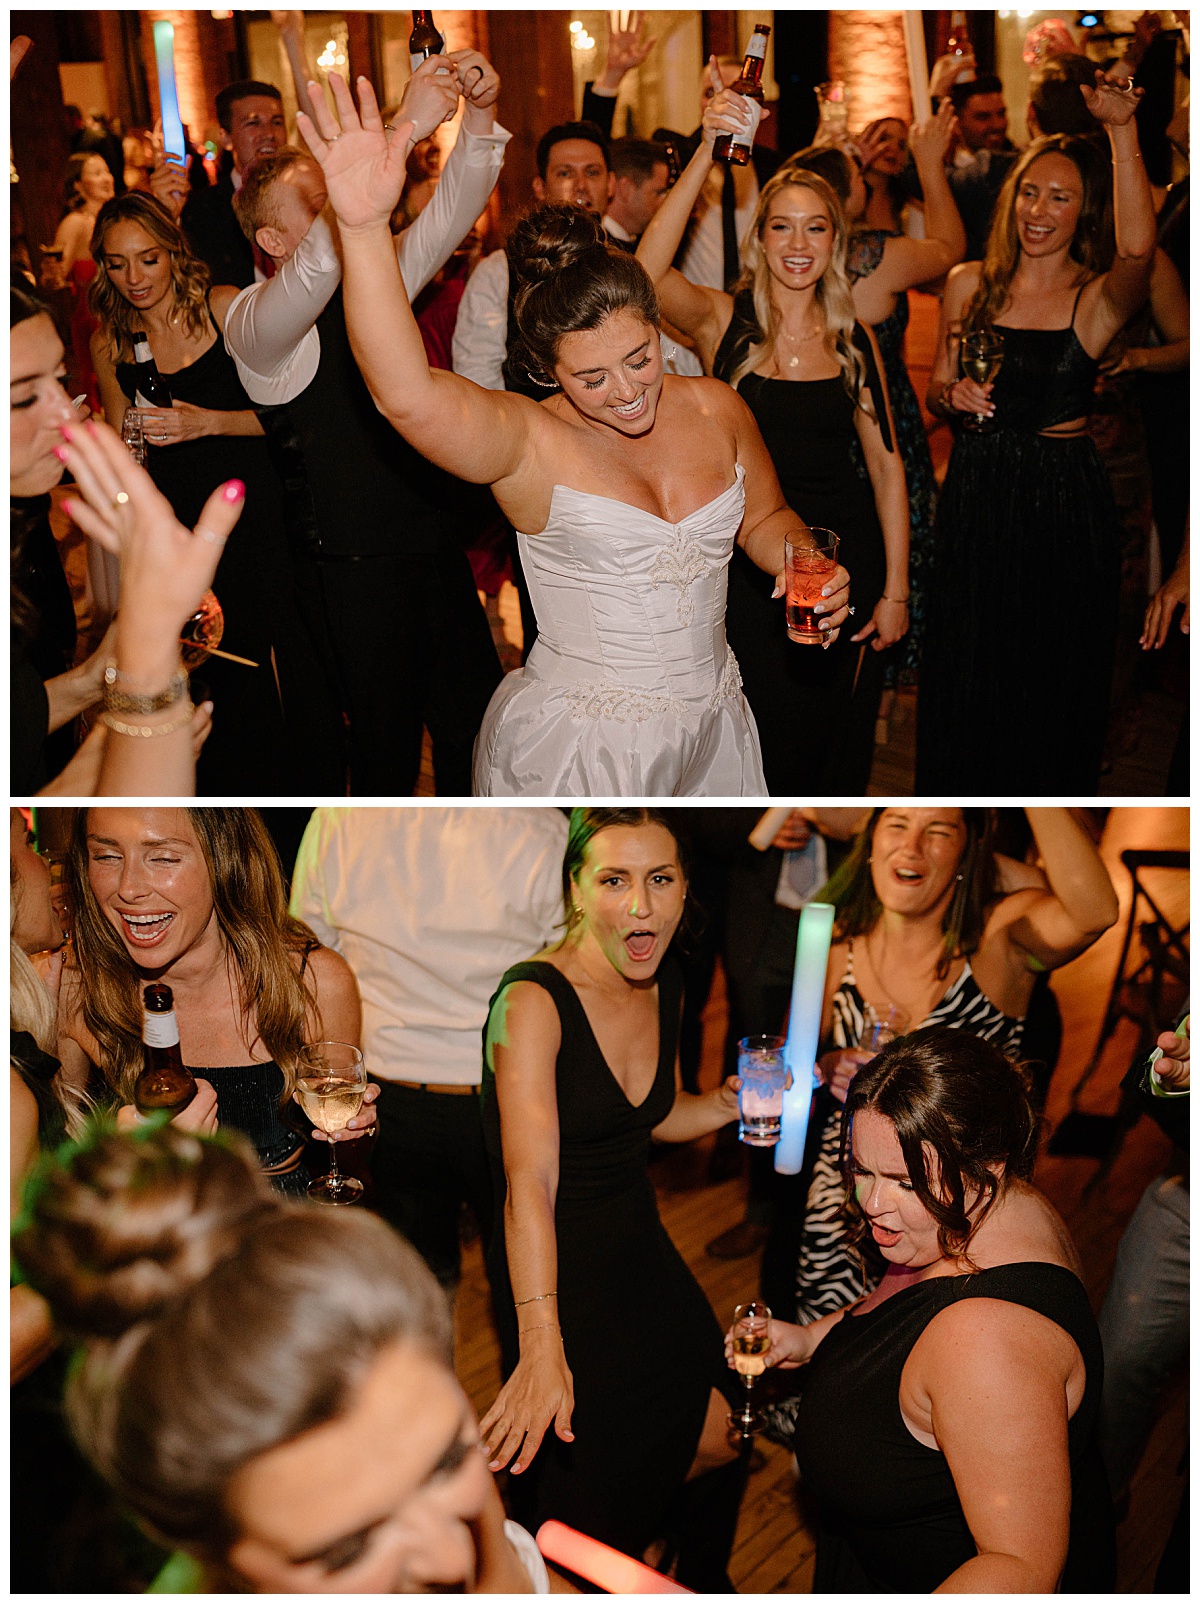 guests dance and drink during reception by Chicago photographer